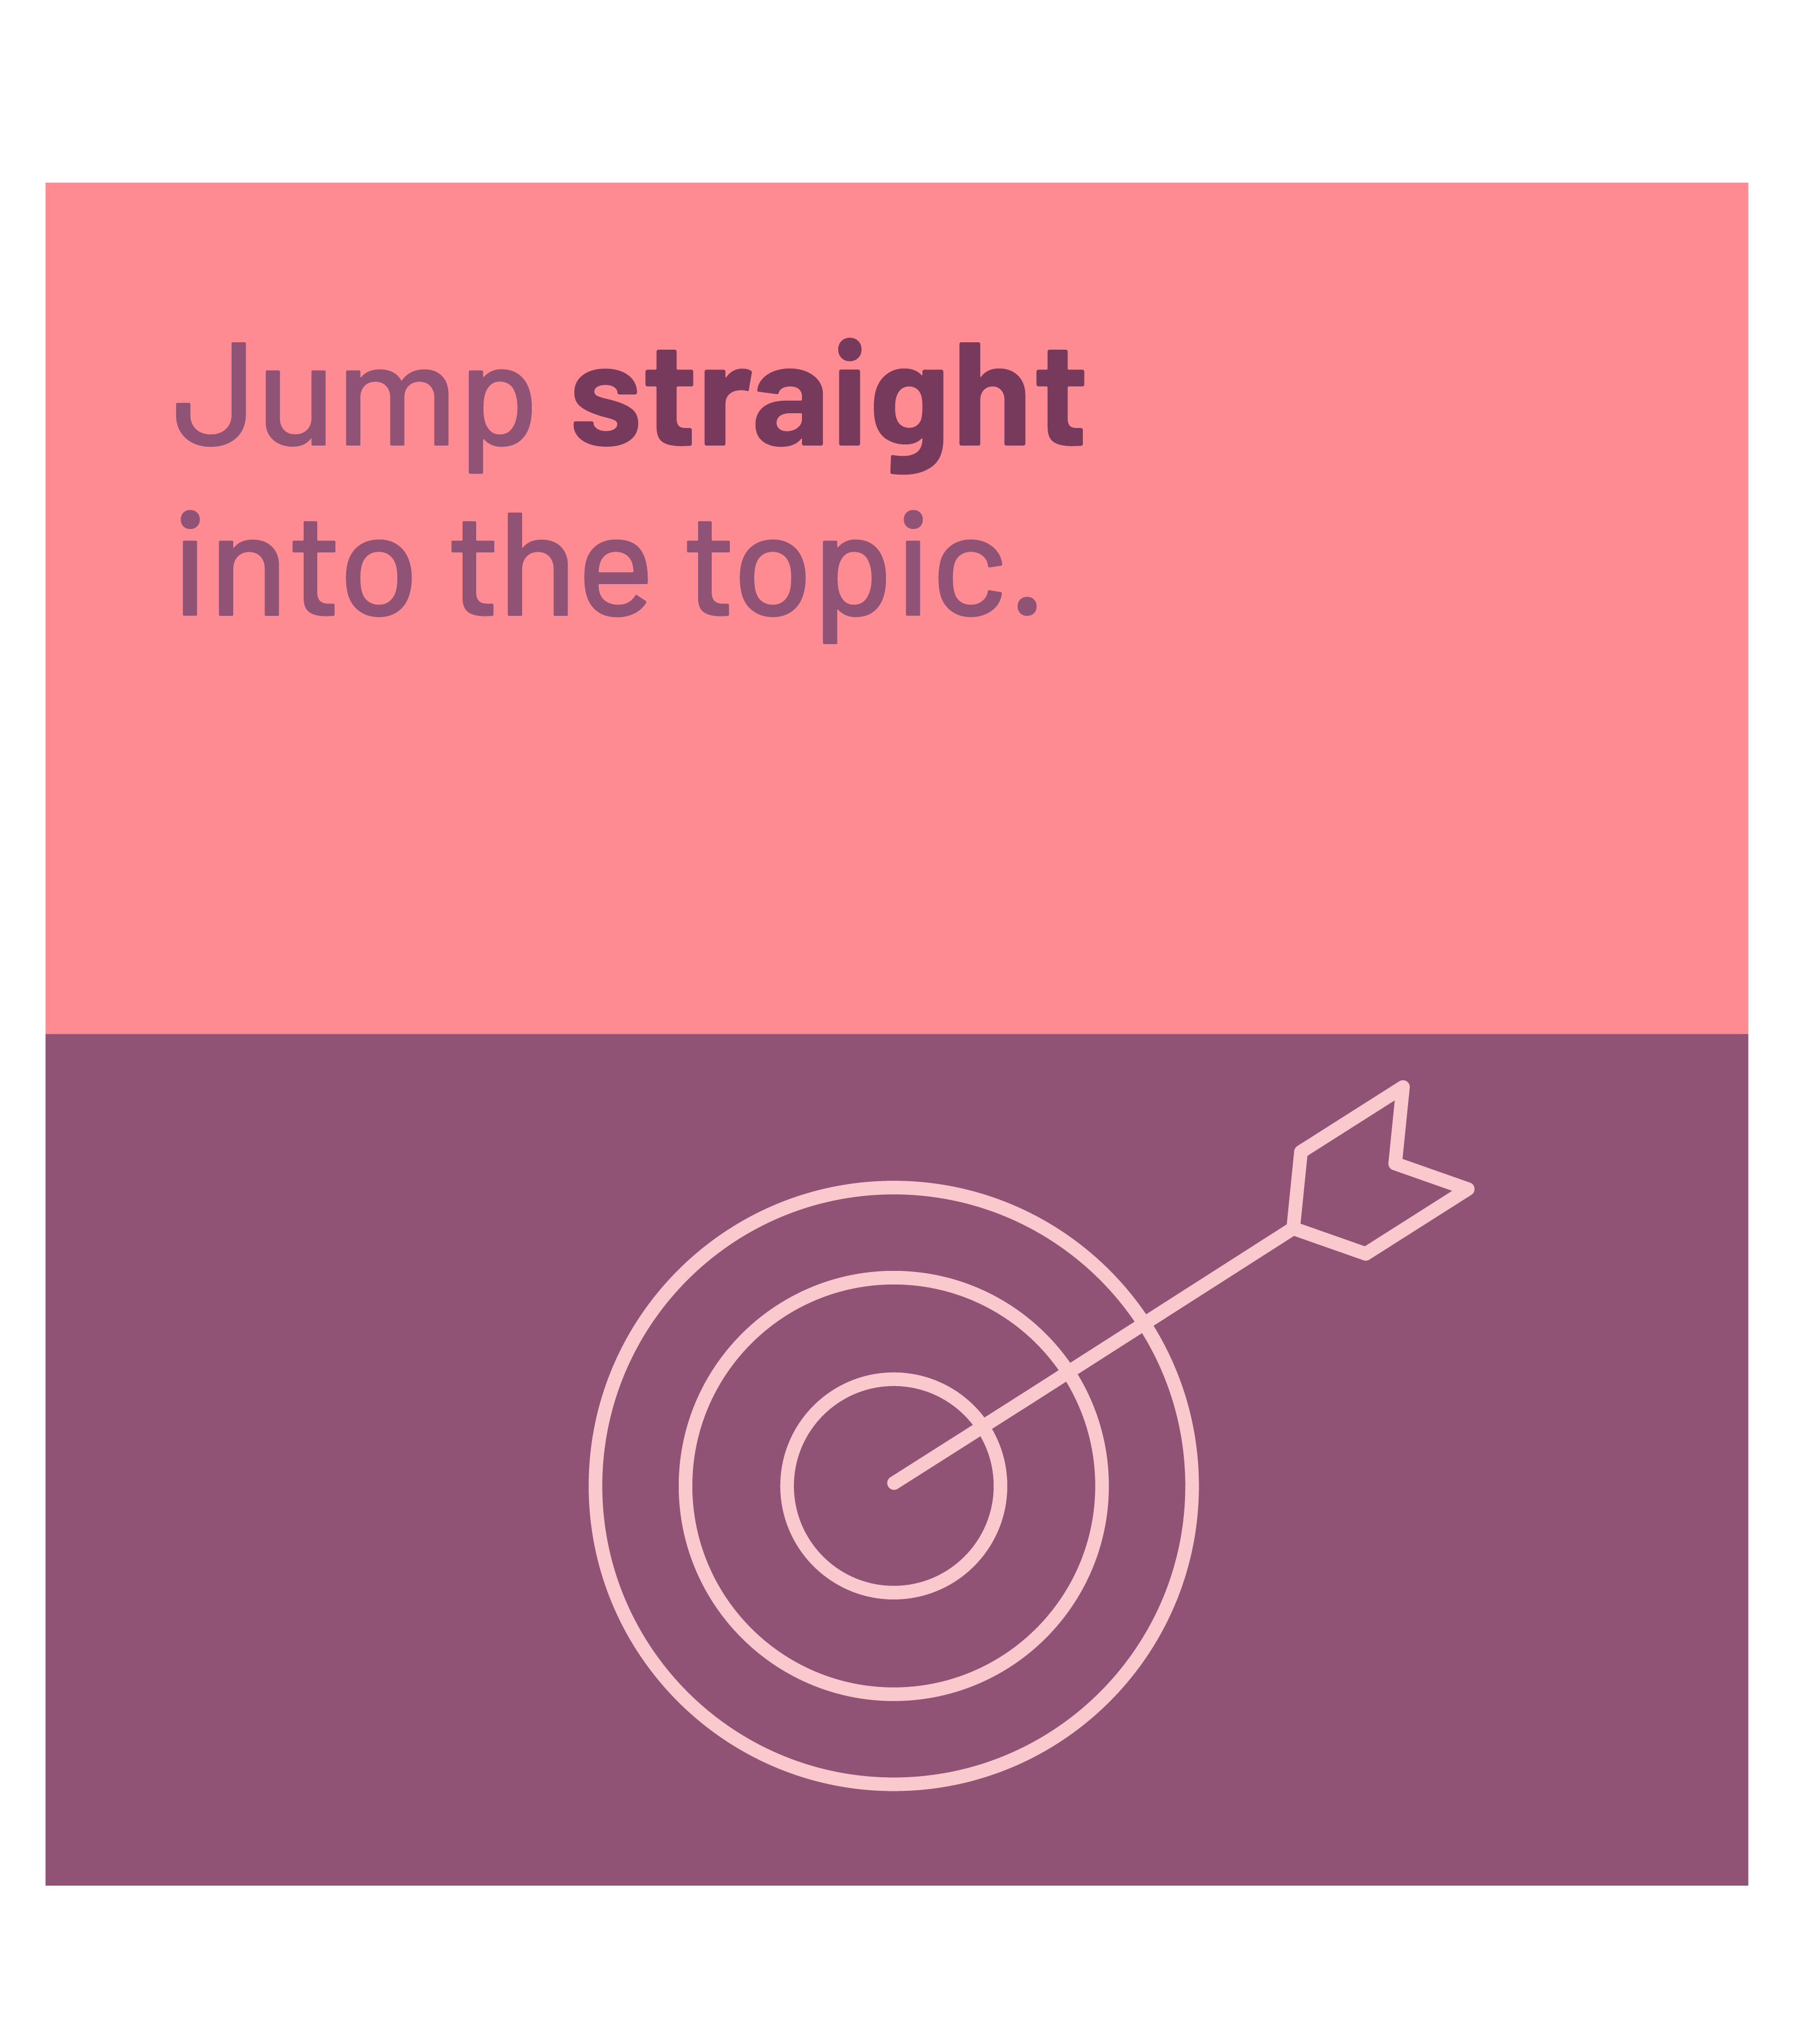 Text and graphic of Jump straight into the topic